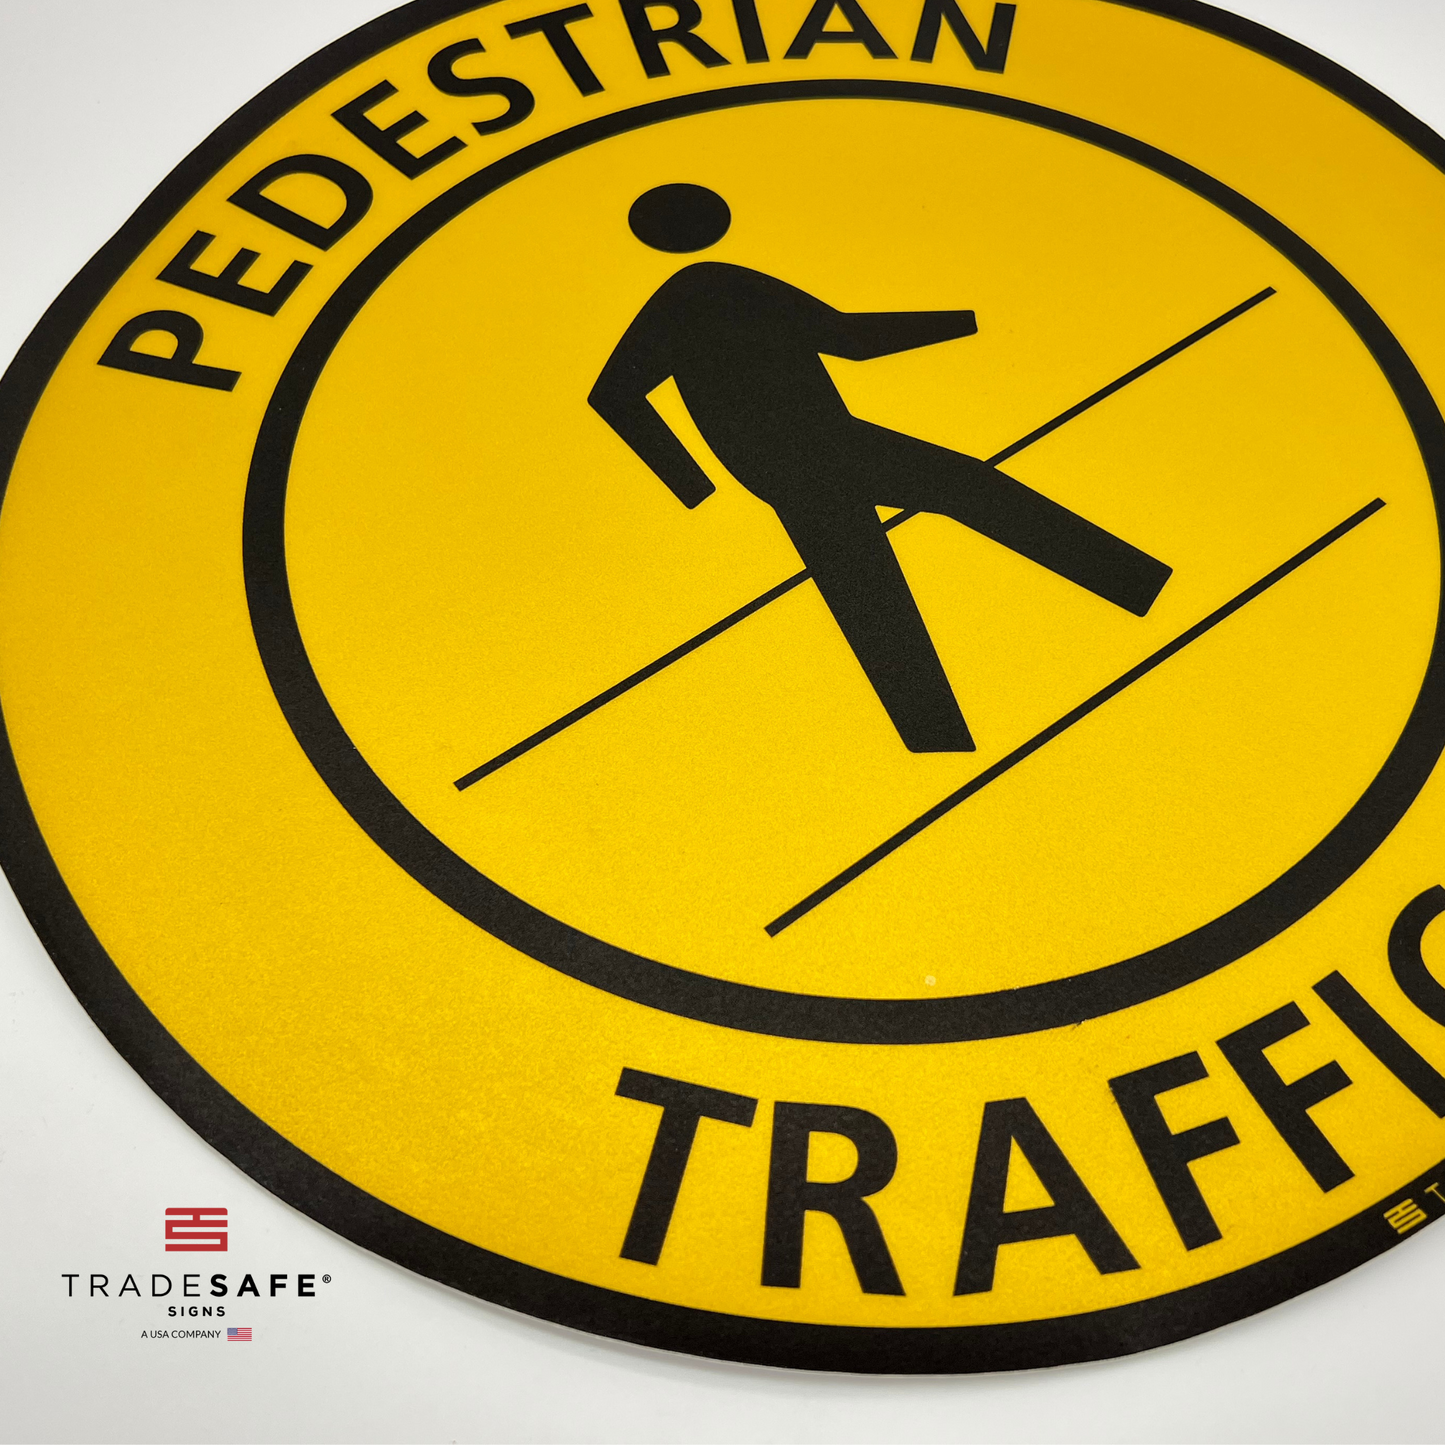 close-up of "pedestrian traffic only" sign